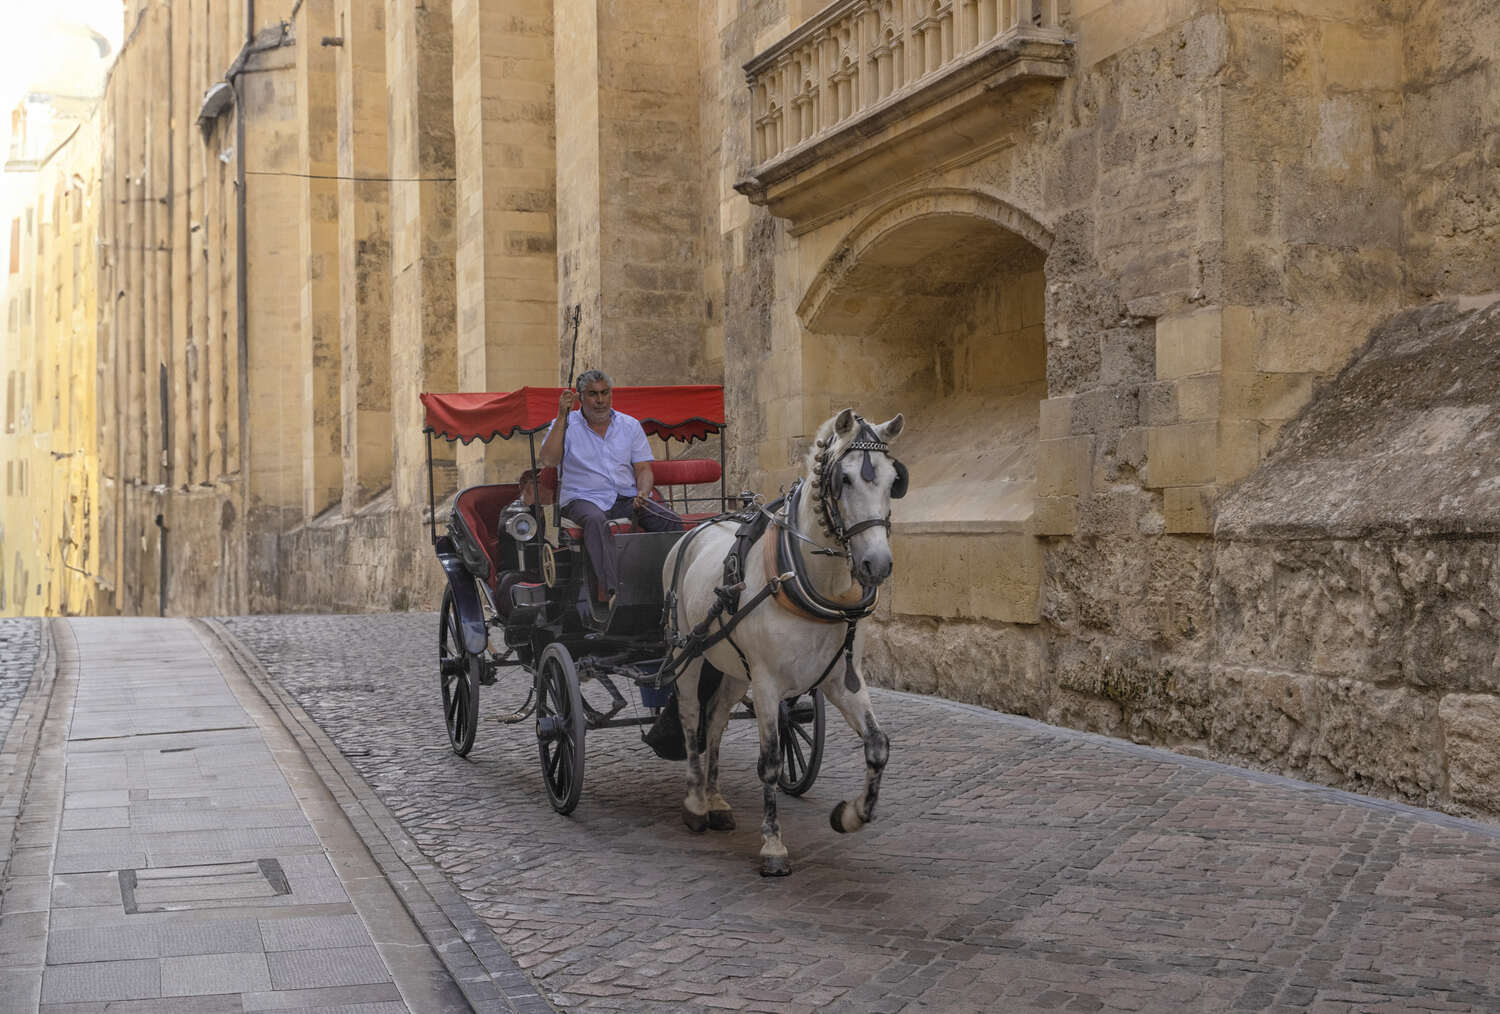 Streets of Cordoba with a horse carriage